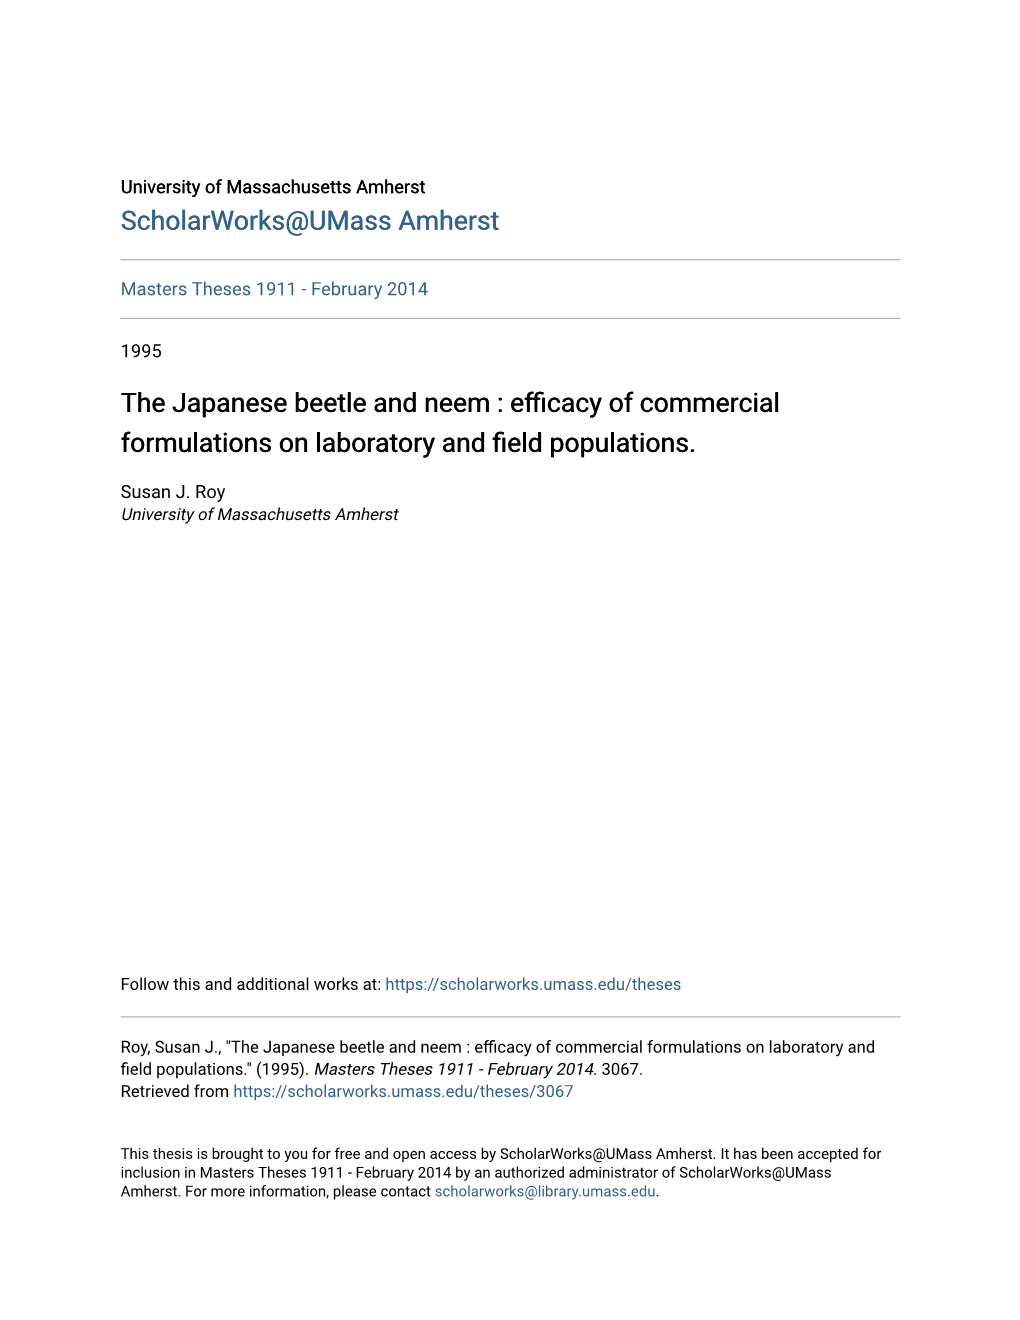 The Japanese Beetle and Neem : Efficacy of Commercial Formulations on Laboratory and Field Populations